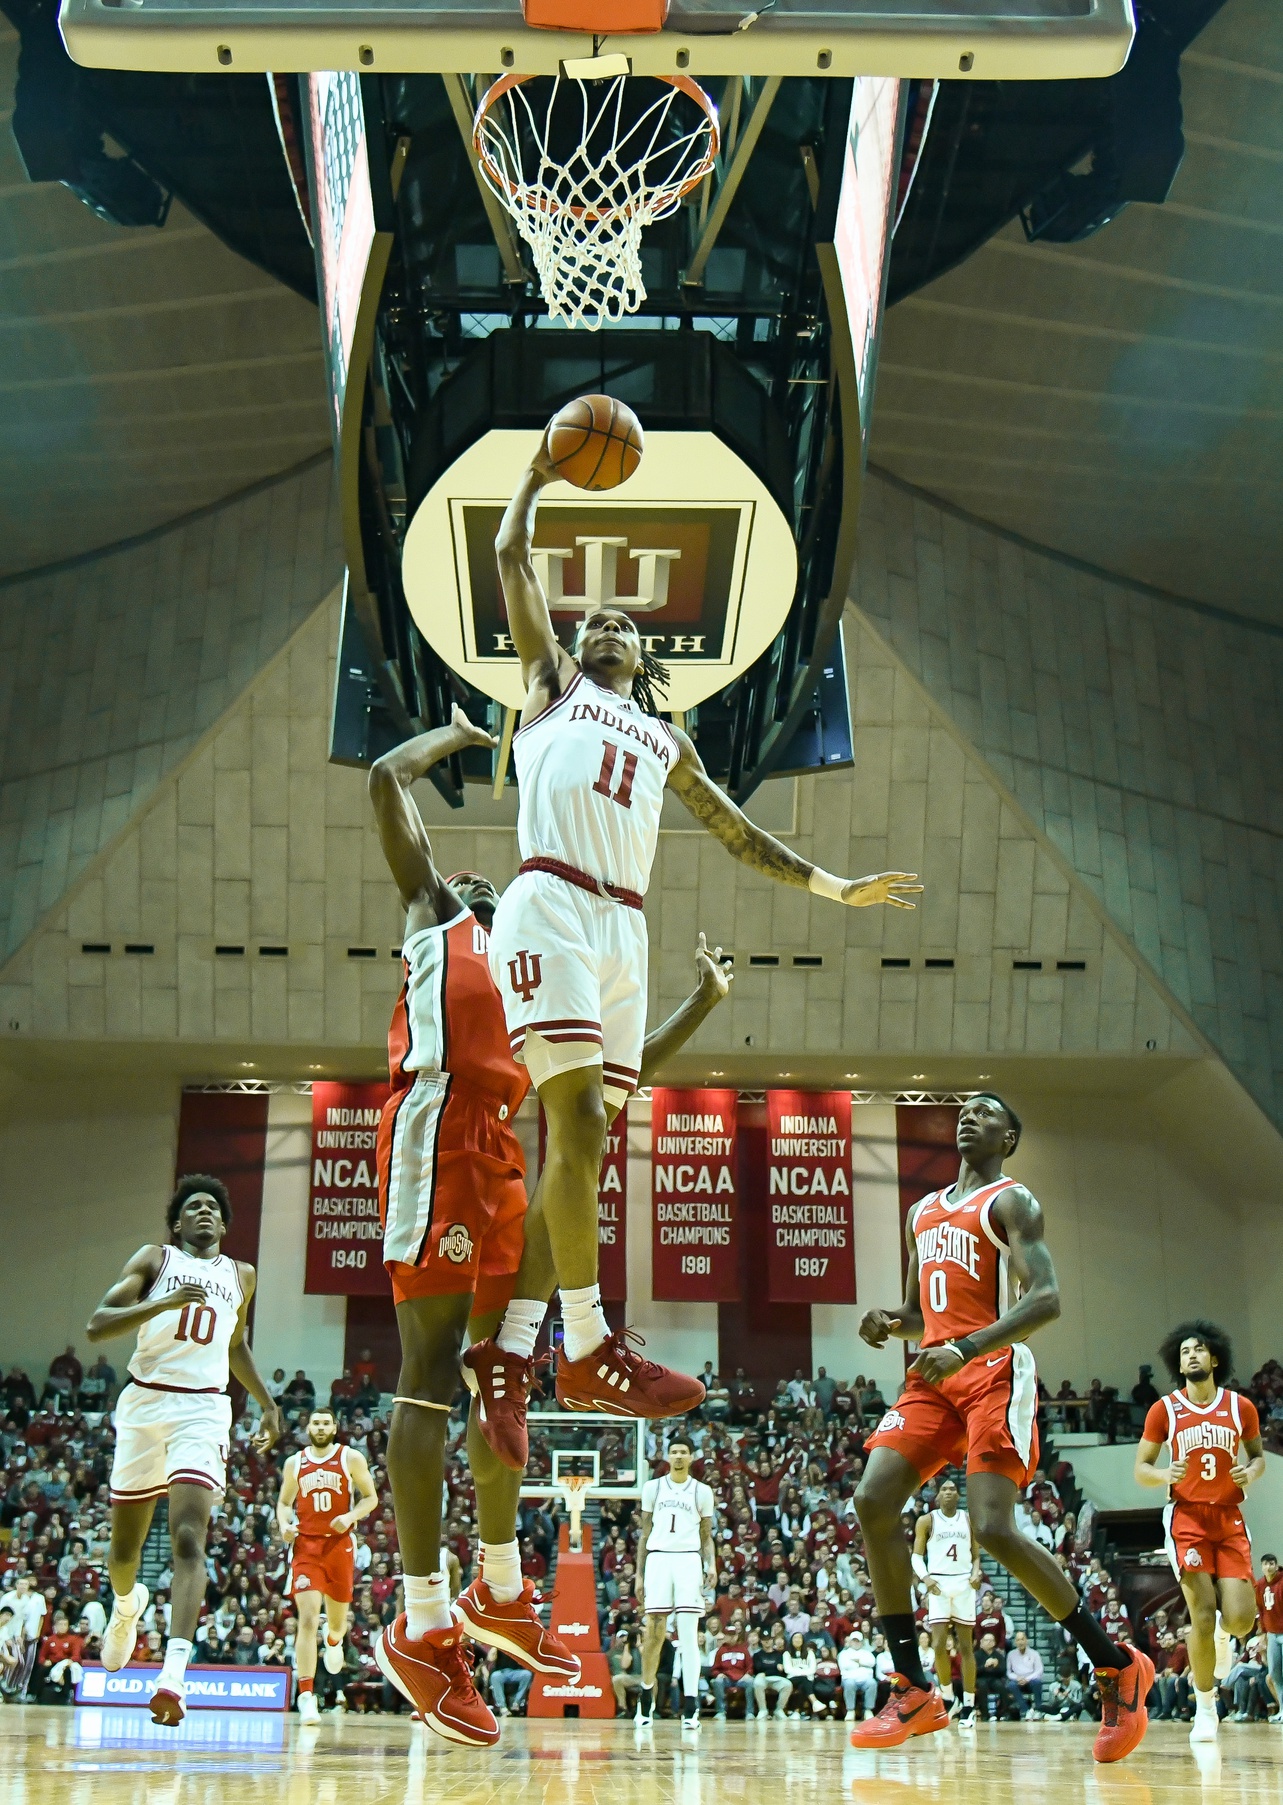 Indiana Hoosiers guard CJ Gunn (11) dunks the ball against Ohio State Buckeyes center Felix Okpara (34) during the first half at Simon Skjodt Assembly Hall.